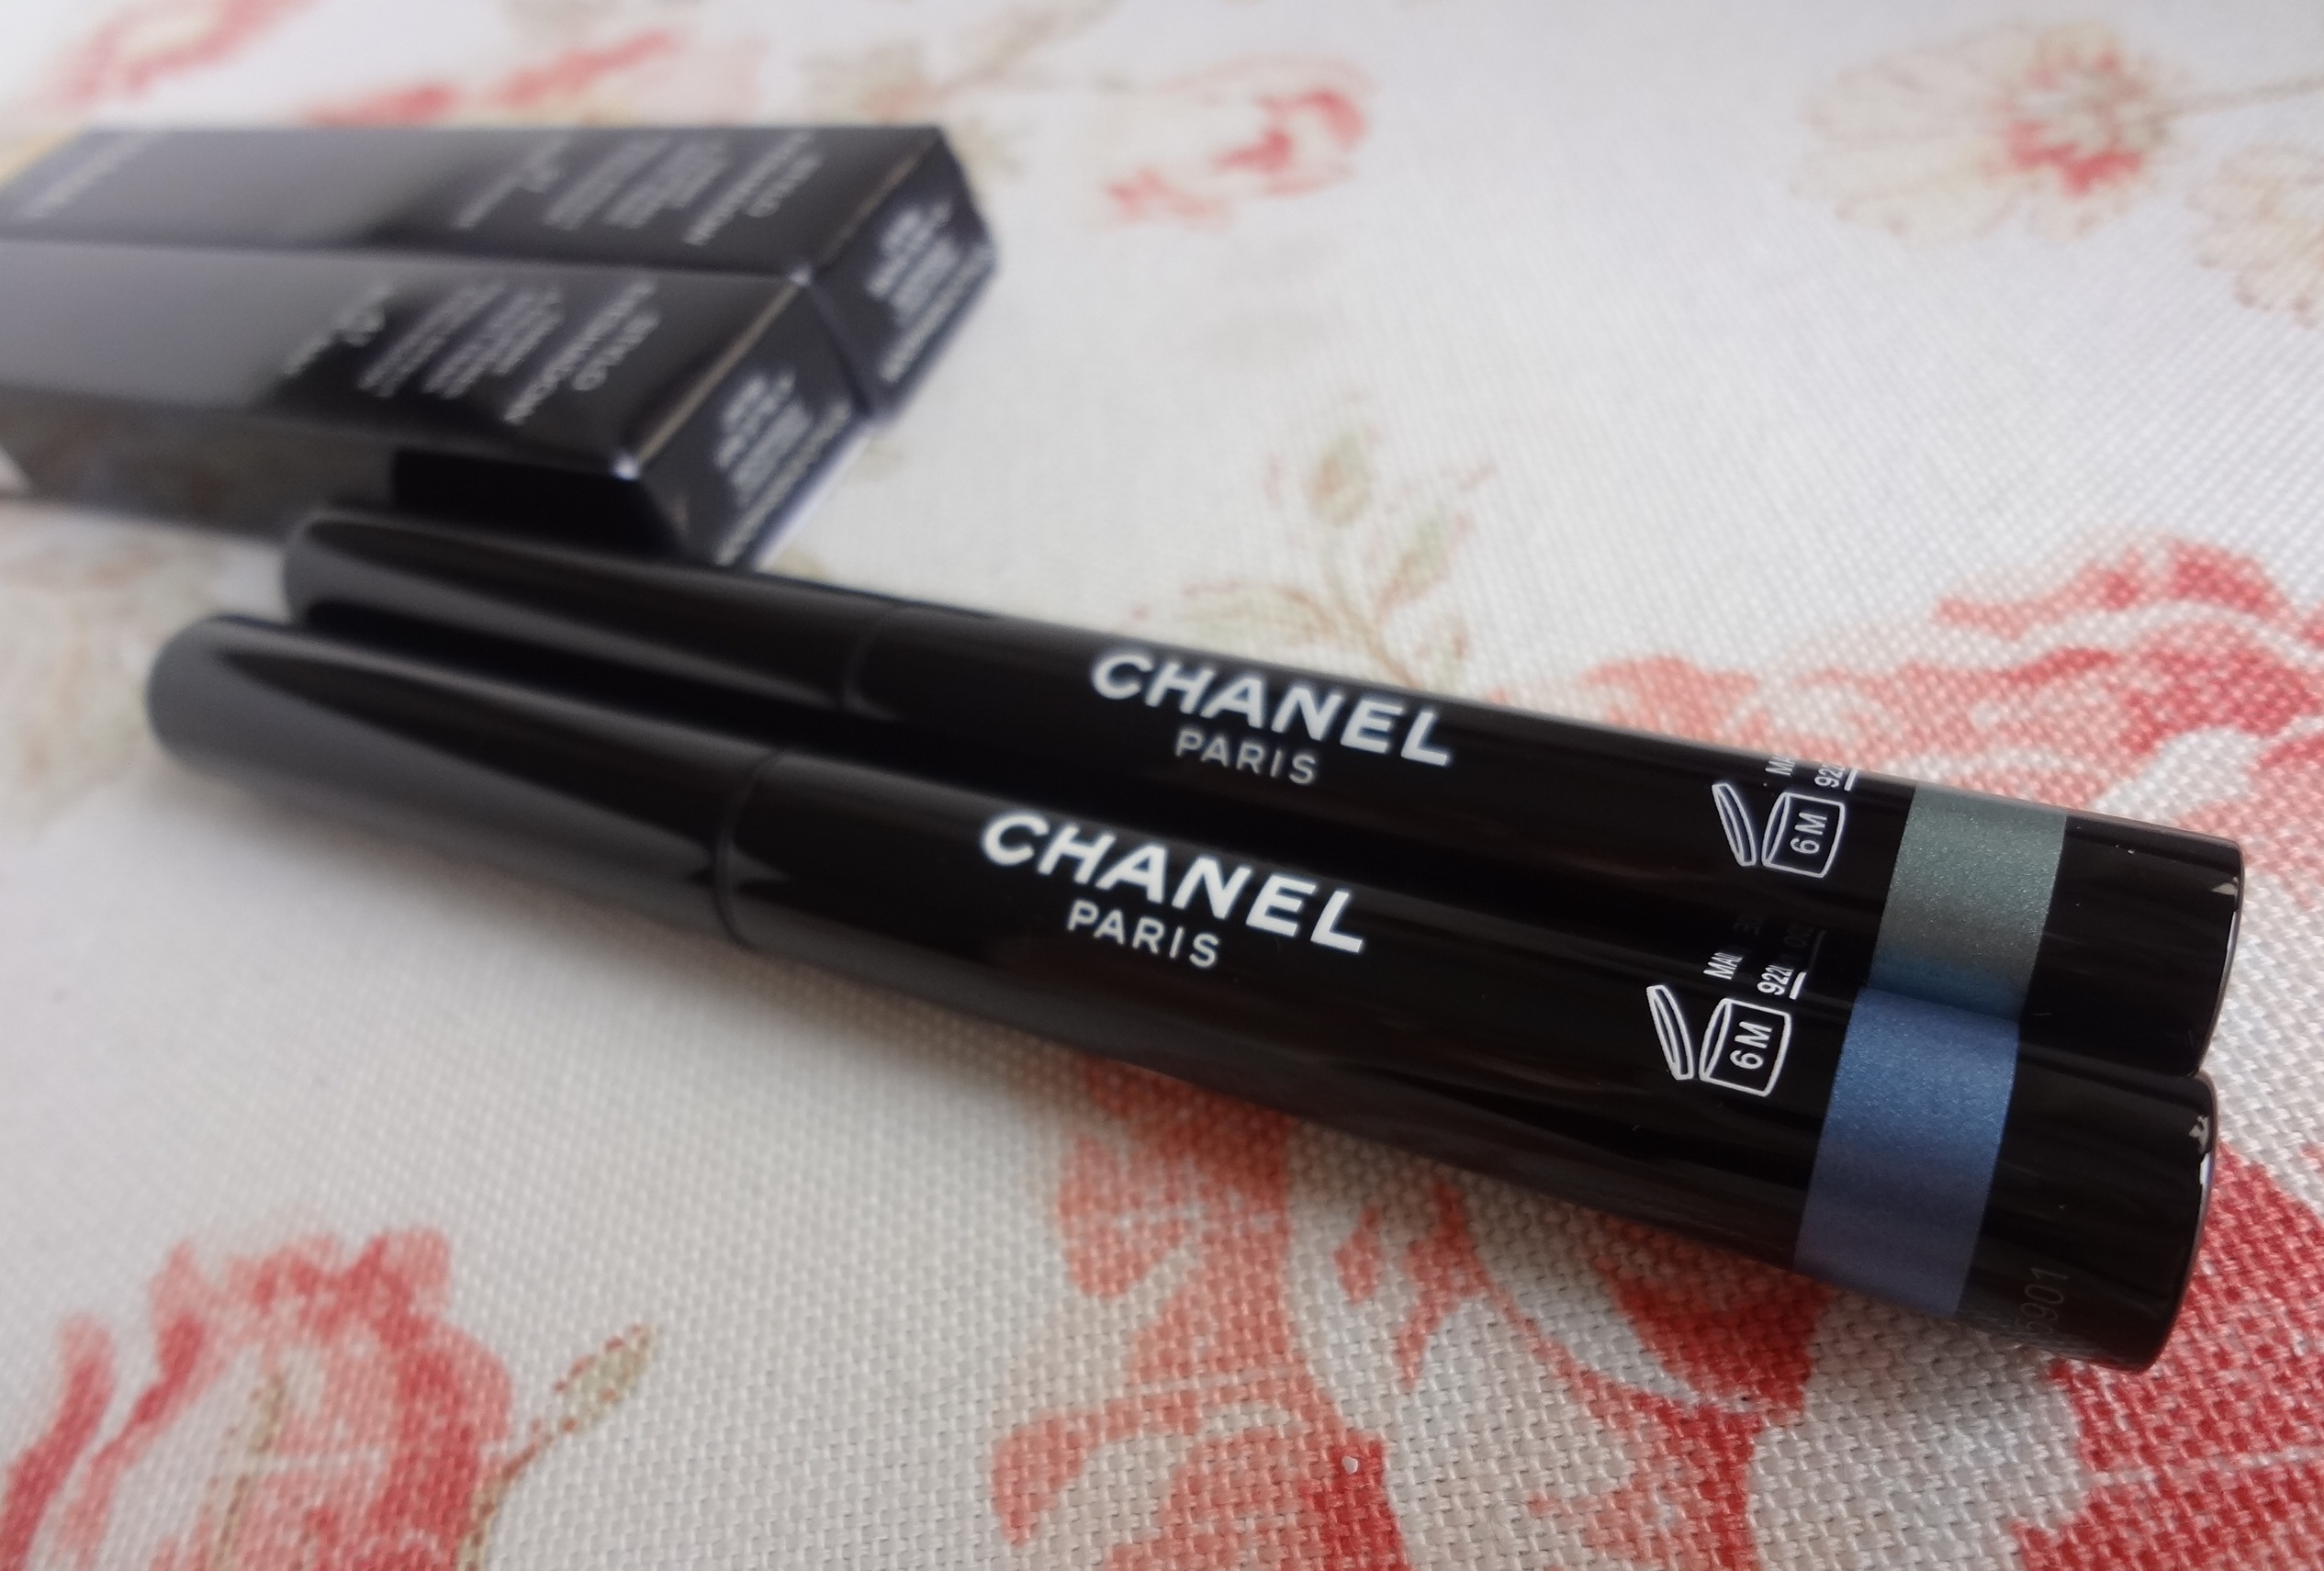 Chanel Stylo Eyeshadows in Jade Shore & Blue Bay review